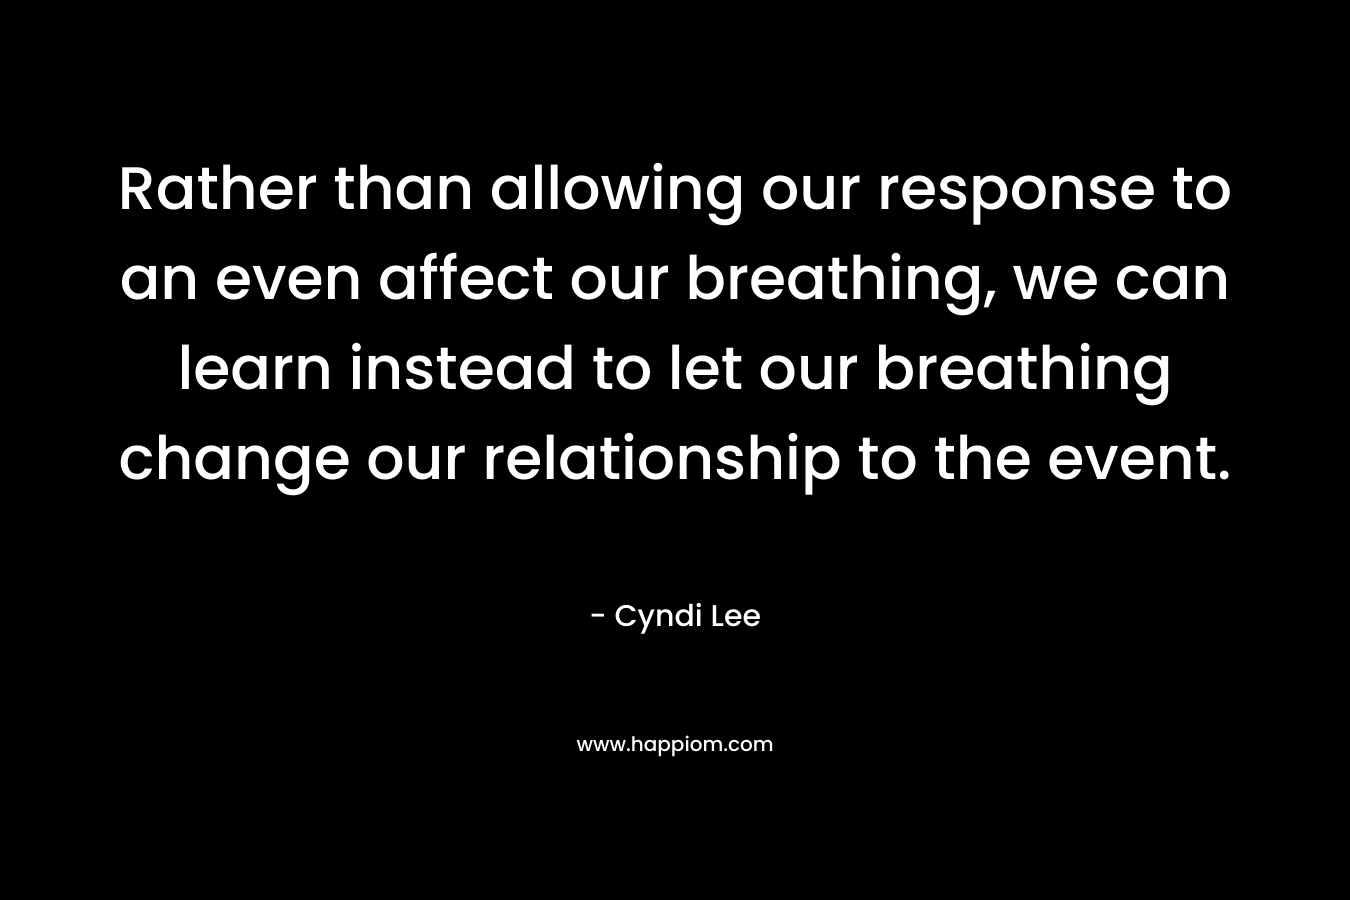 Rather than allowing our response to an even affect our breathing, we can learn instead to let our breathing change our relationship to the event. – Cyndi Lee